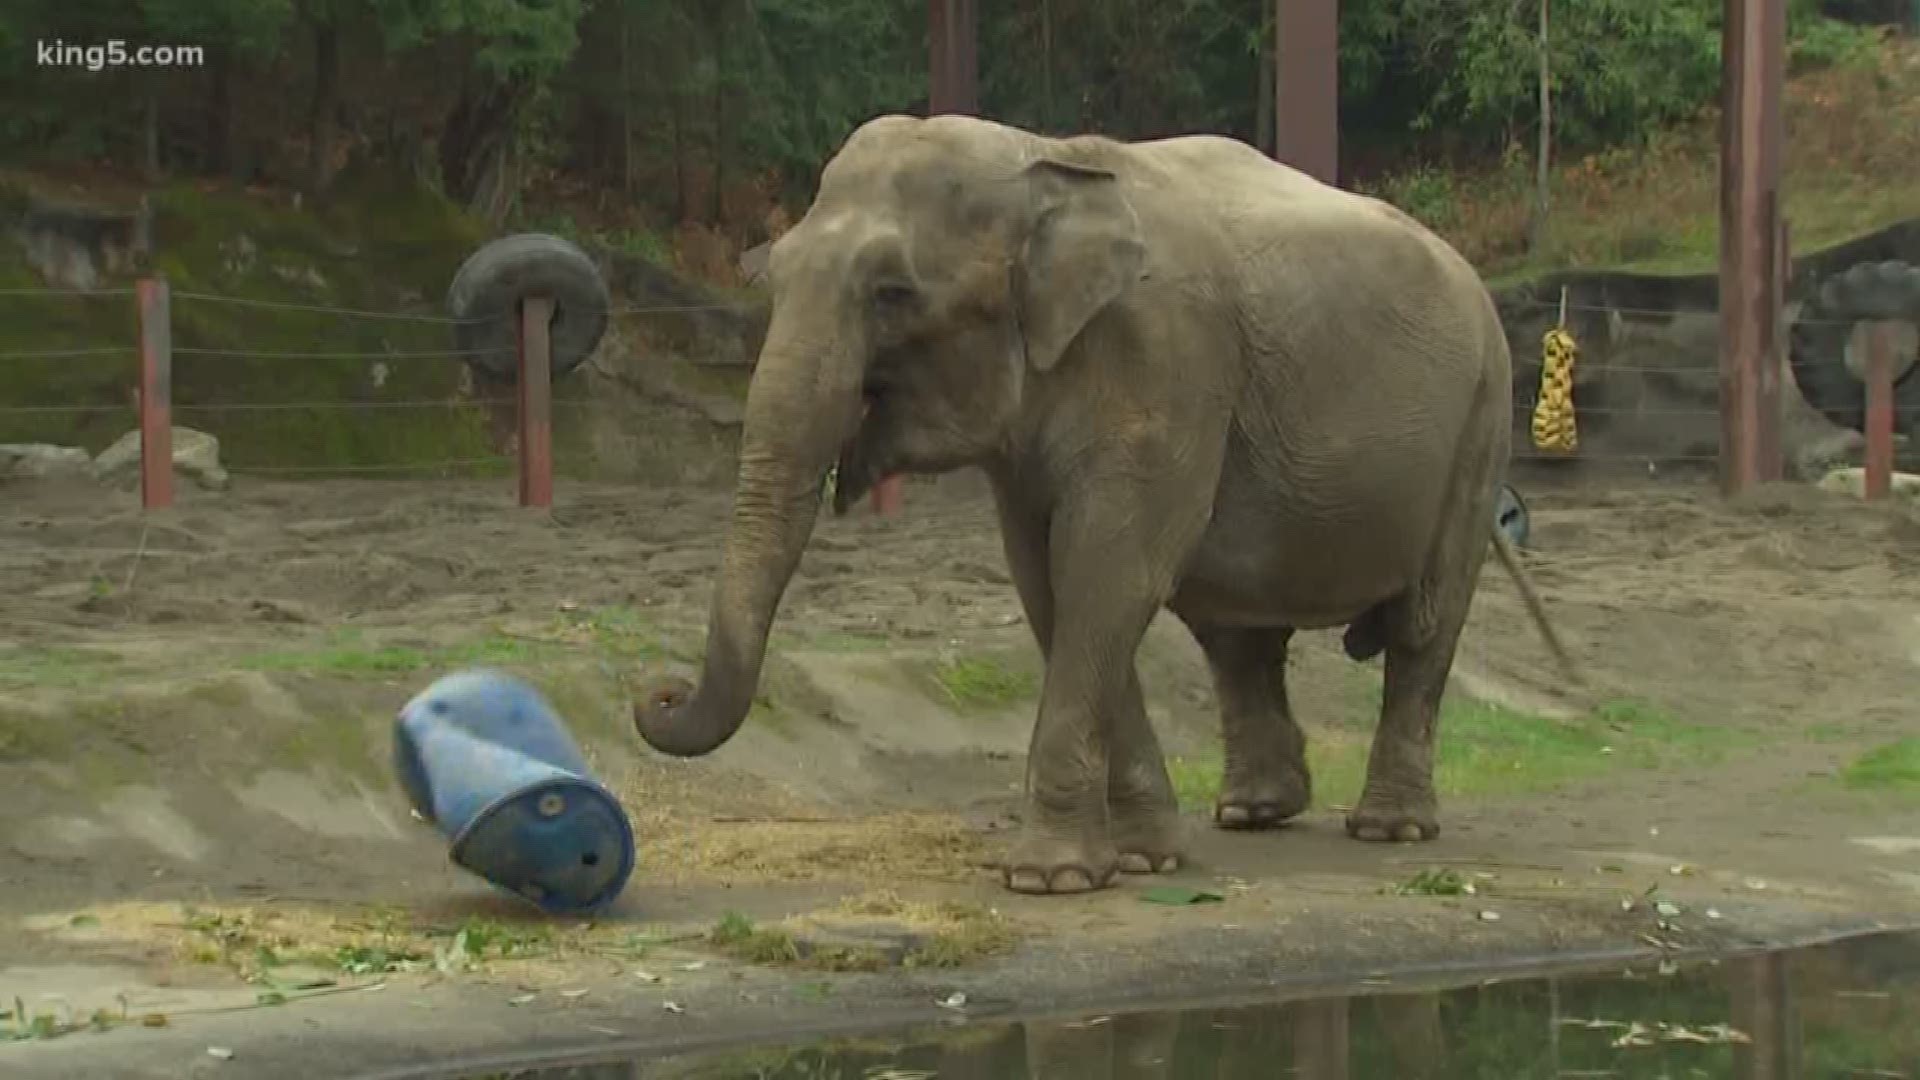 2 elephants at the Point Defiance Zoo tested positive for tuberculosis, but treating it may compromise their immune systems. Zoogoers are not at risk.